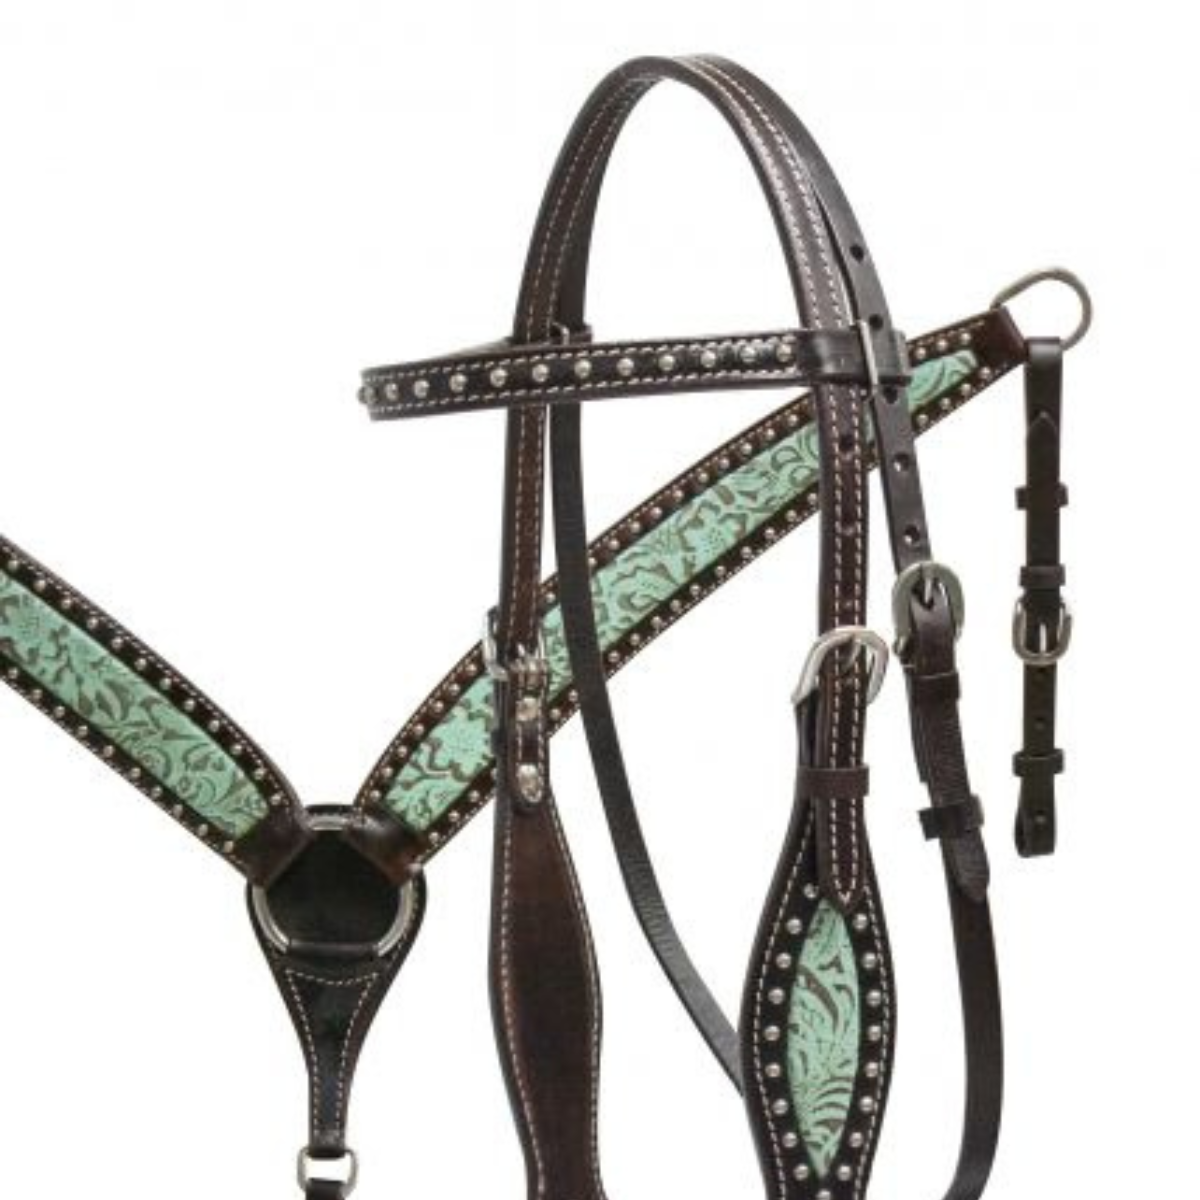 15", 16" DOUBLE T BARREL SADDLE SET WITH TEAL FILIGREE INLAY - Double T Saddles